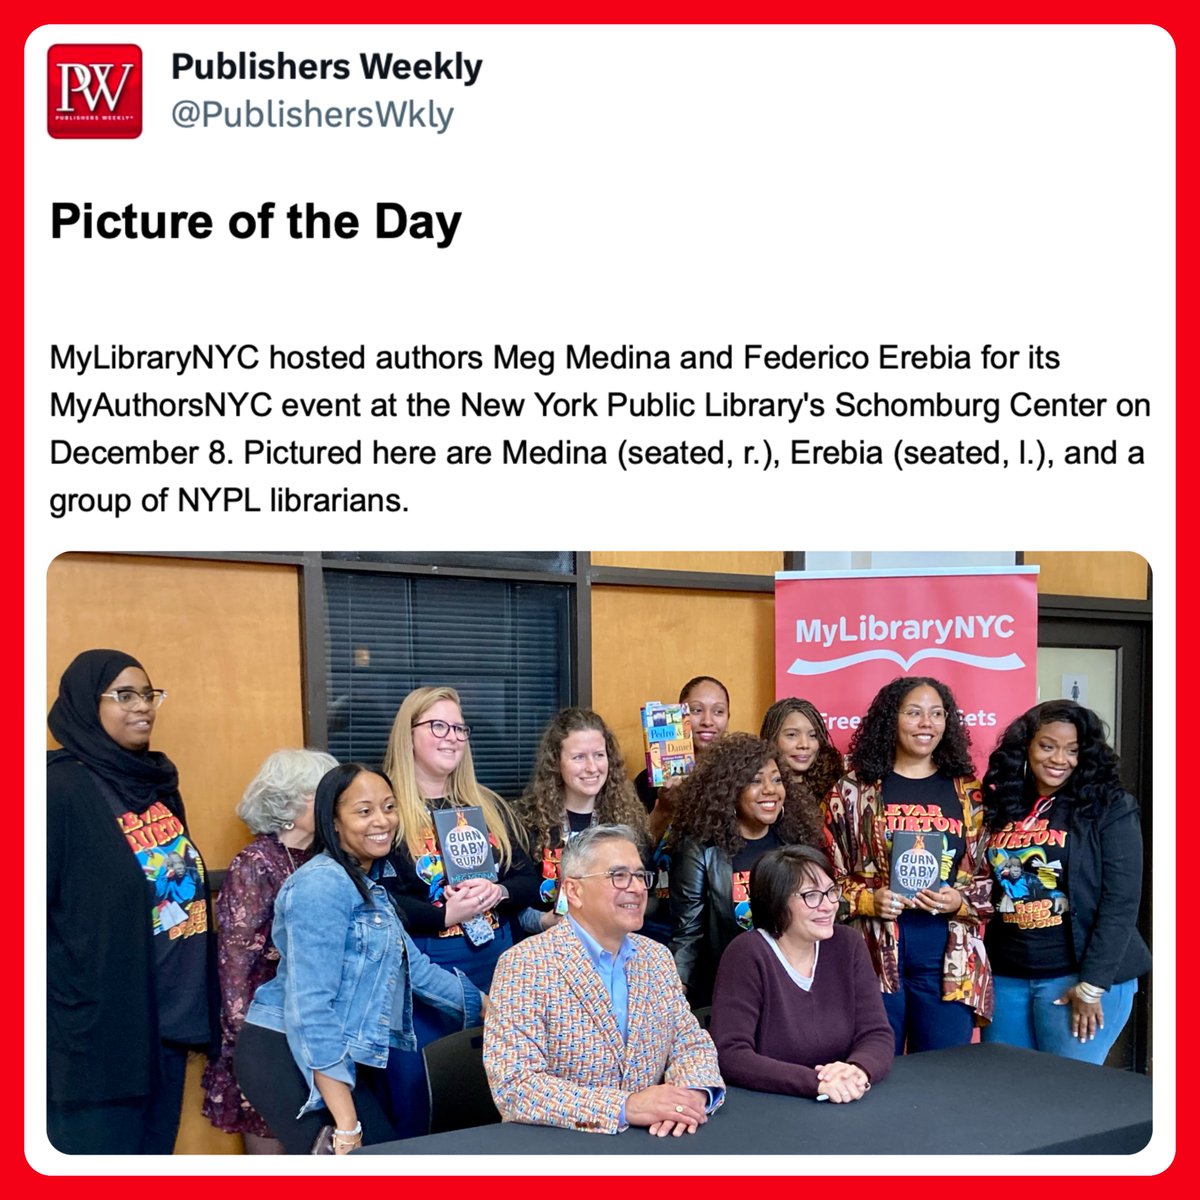 I ❤️ this photo. 

Meg Medina and I are flanked by the NYPL librarians who work behind the scenes to create the MyLibraryNYC events. 

#PedroAndDaniel #PedroWithoutDaniel #MyAuthorsNYC2023 @Librarian_Eli @NYPL #BookTwitter #LibraryTwitter #TeacherTwitter